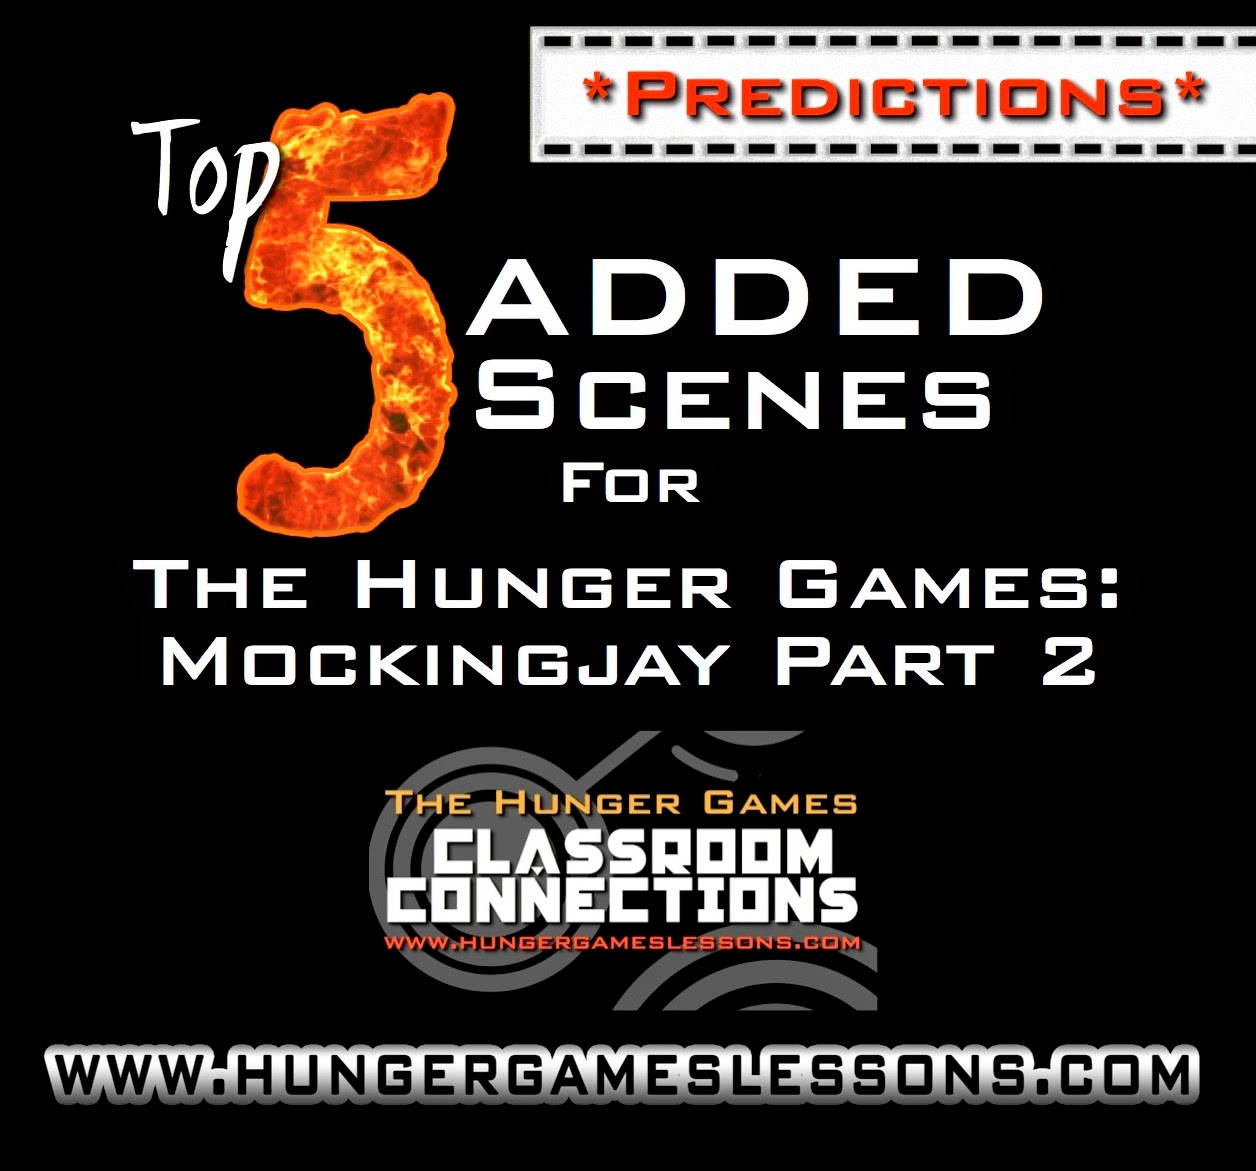 Predicted Additional Scenes for Mockingjay Part 2